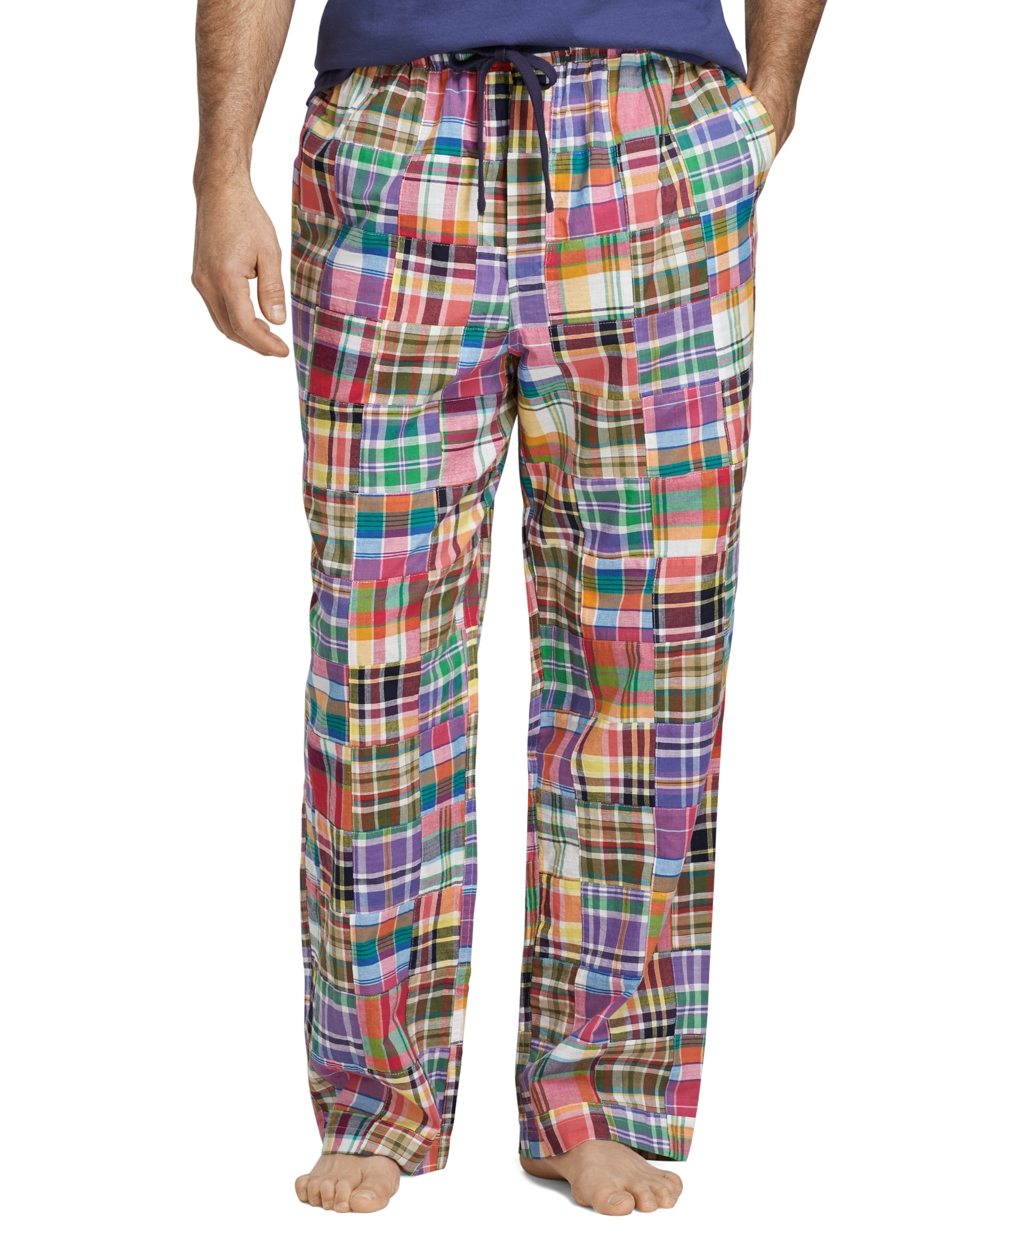 Lyst - Brooks Brothers Patchwork Madras Lounge Pants in Orange for Men